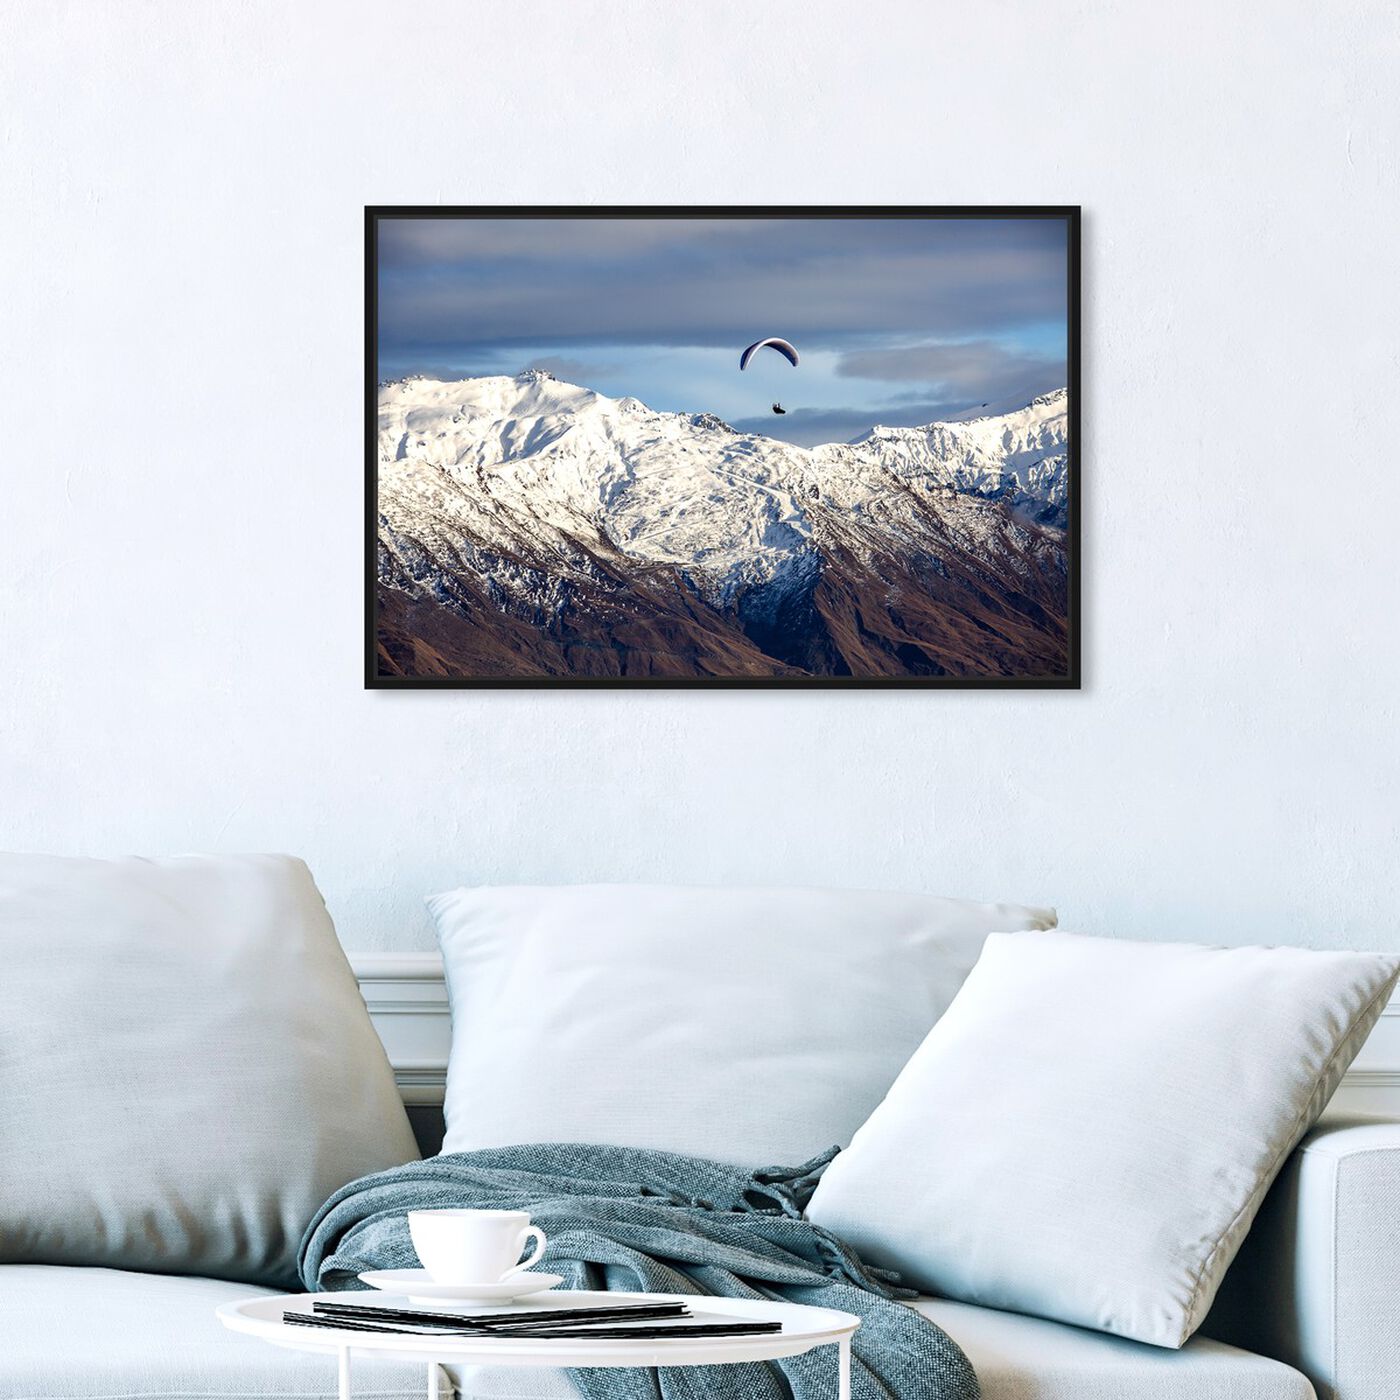 Hanging view of Curro Cardenal - Paragliding Free featuring nature and landscape and mountains art.